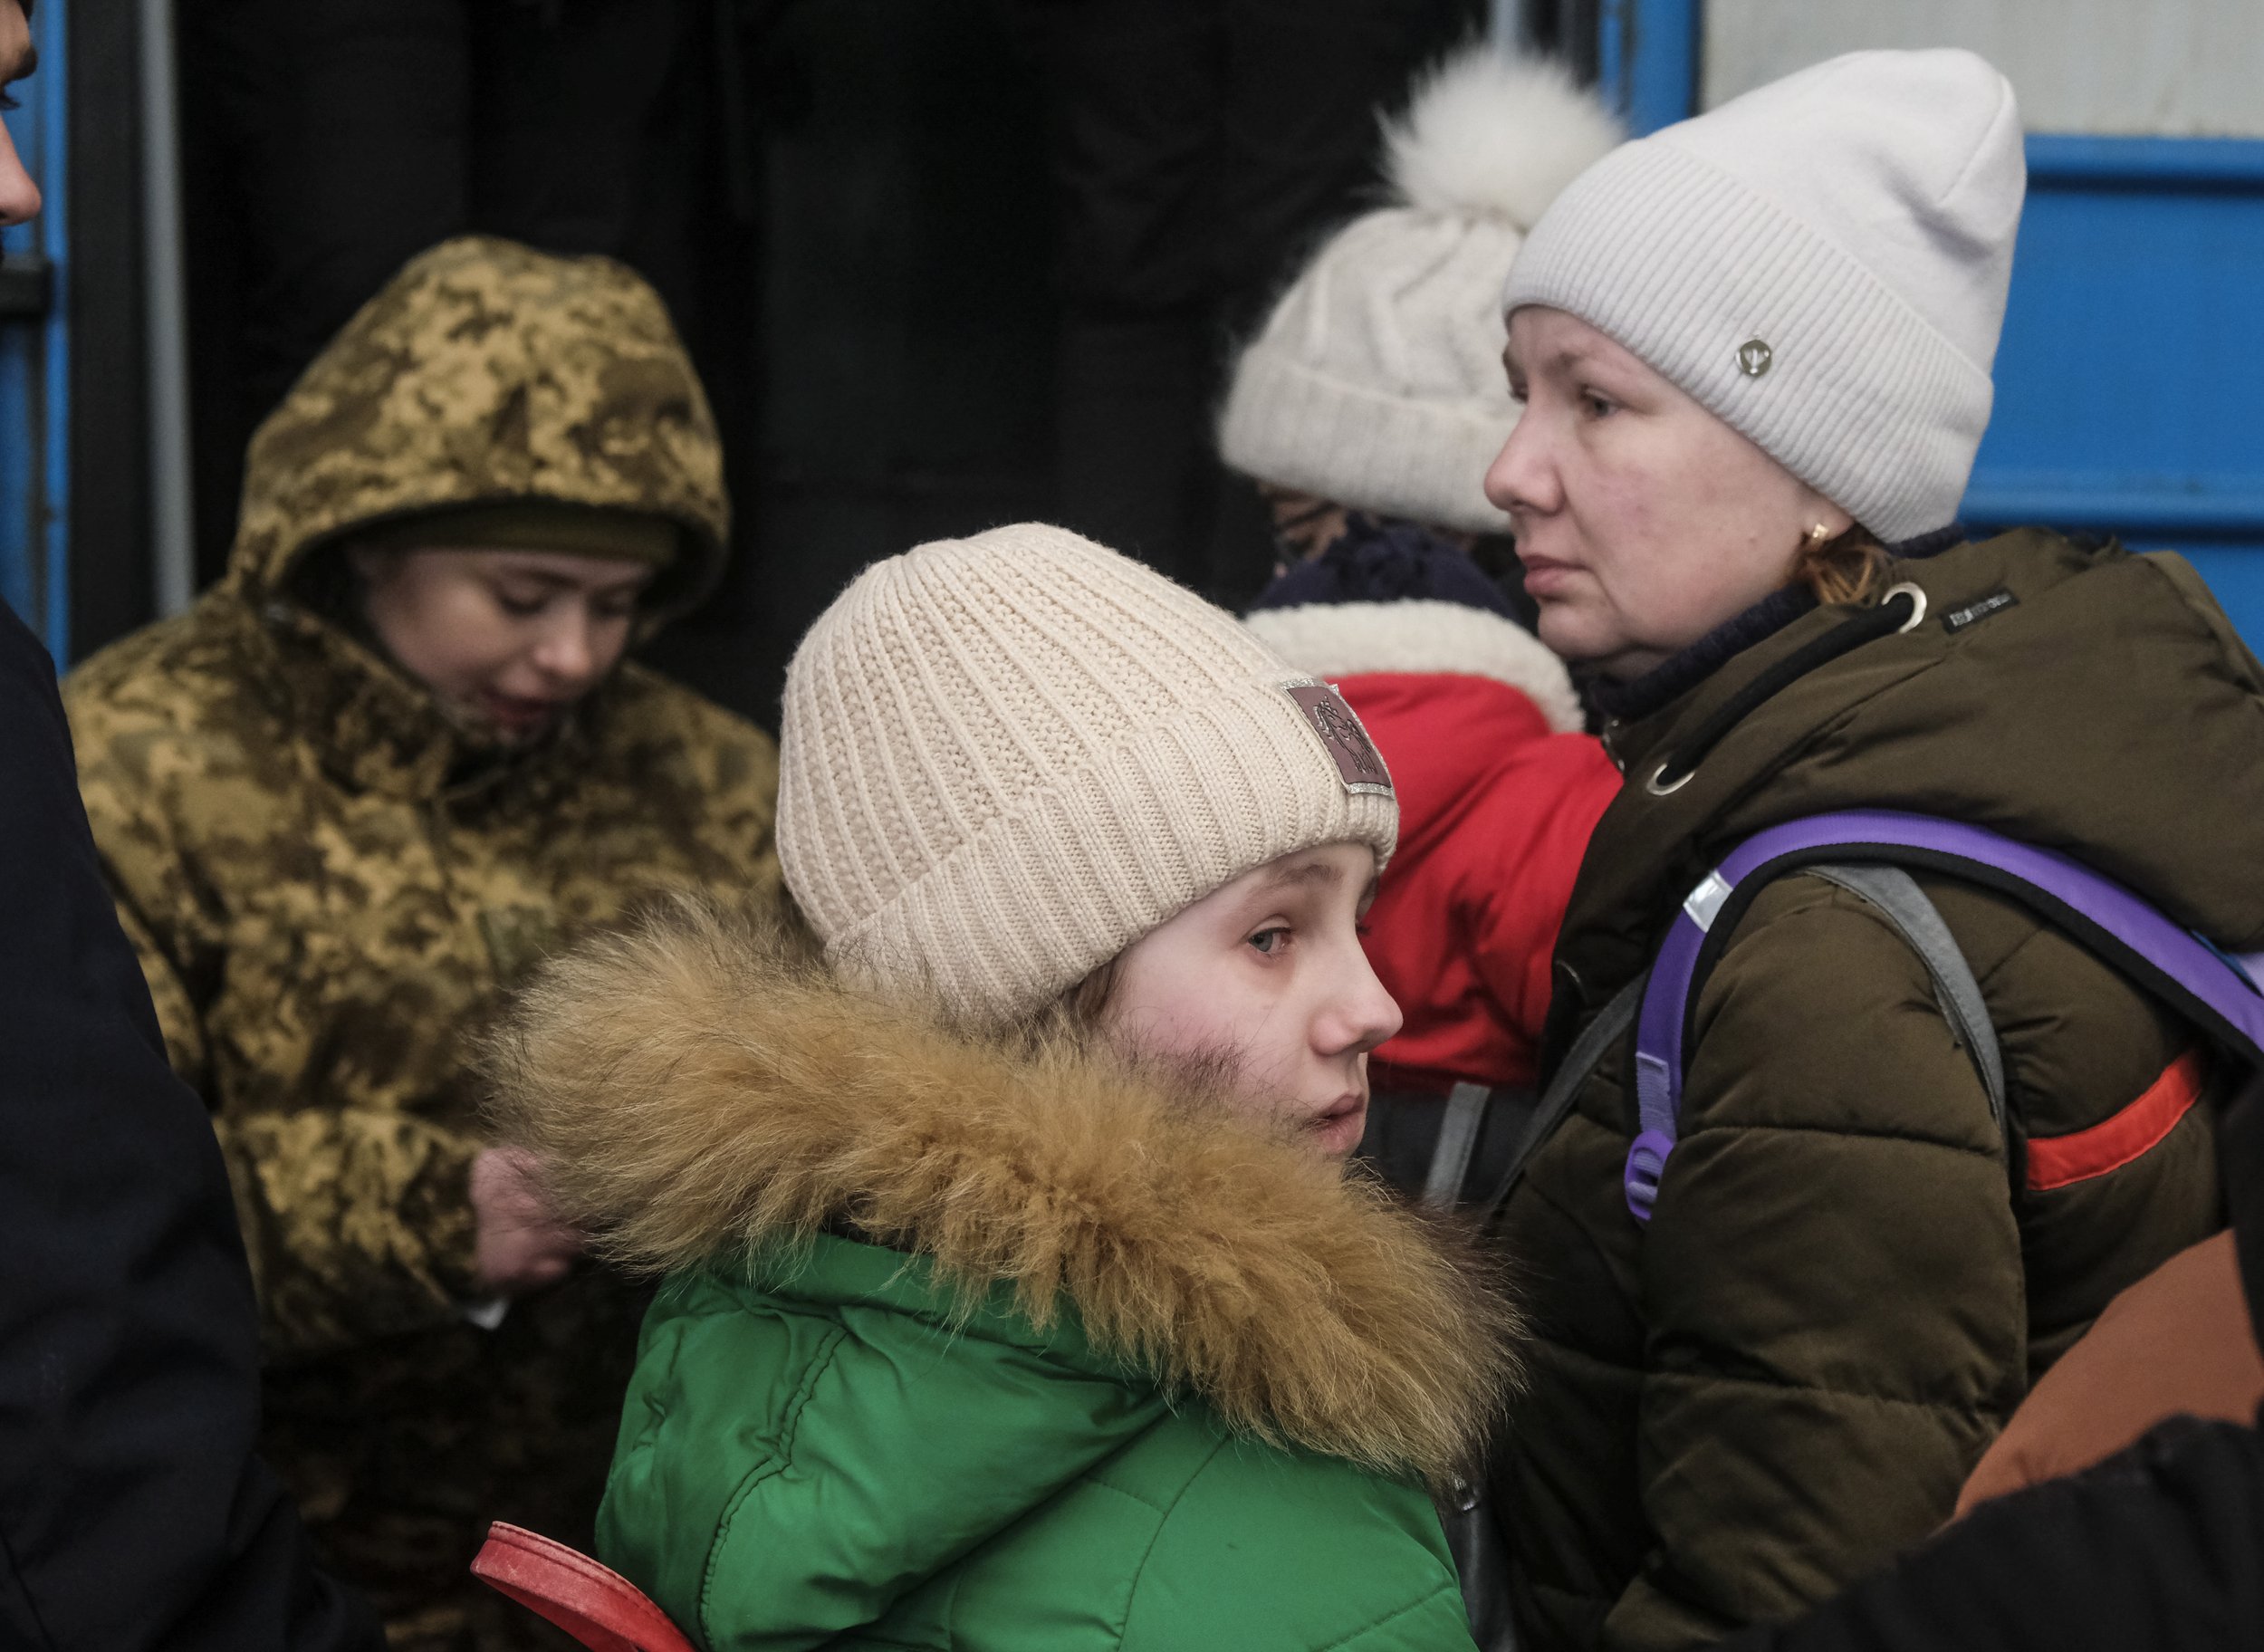  A young girl cries as she waits to board a train with her mother and siblings headed to the Polish border at the Lviv-Holovnyi railway station in Lviv, Ukraine on March 11th, 2022. Hundreds of thousands of Ukrainian civilians pass through the rail s